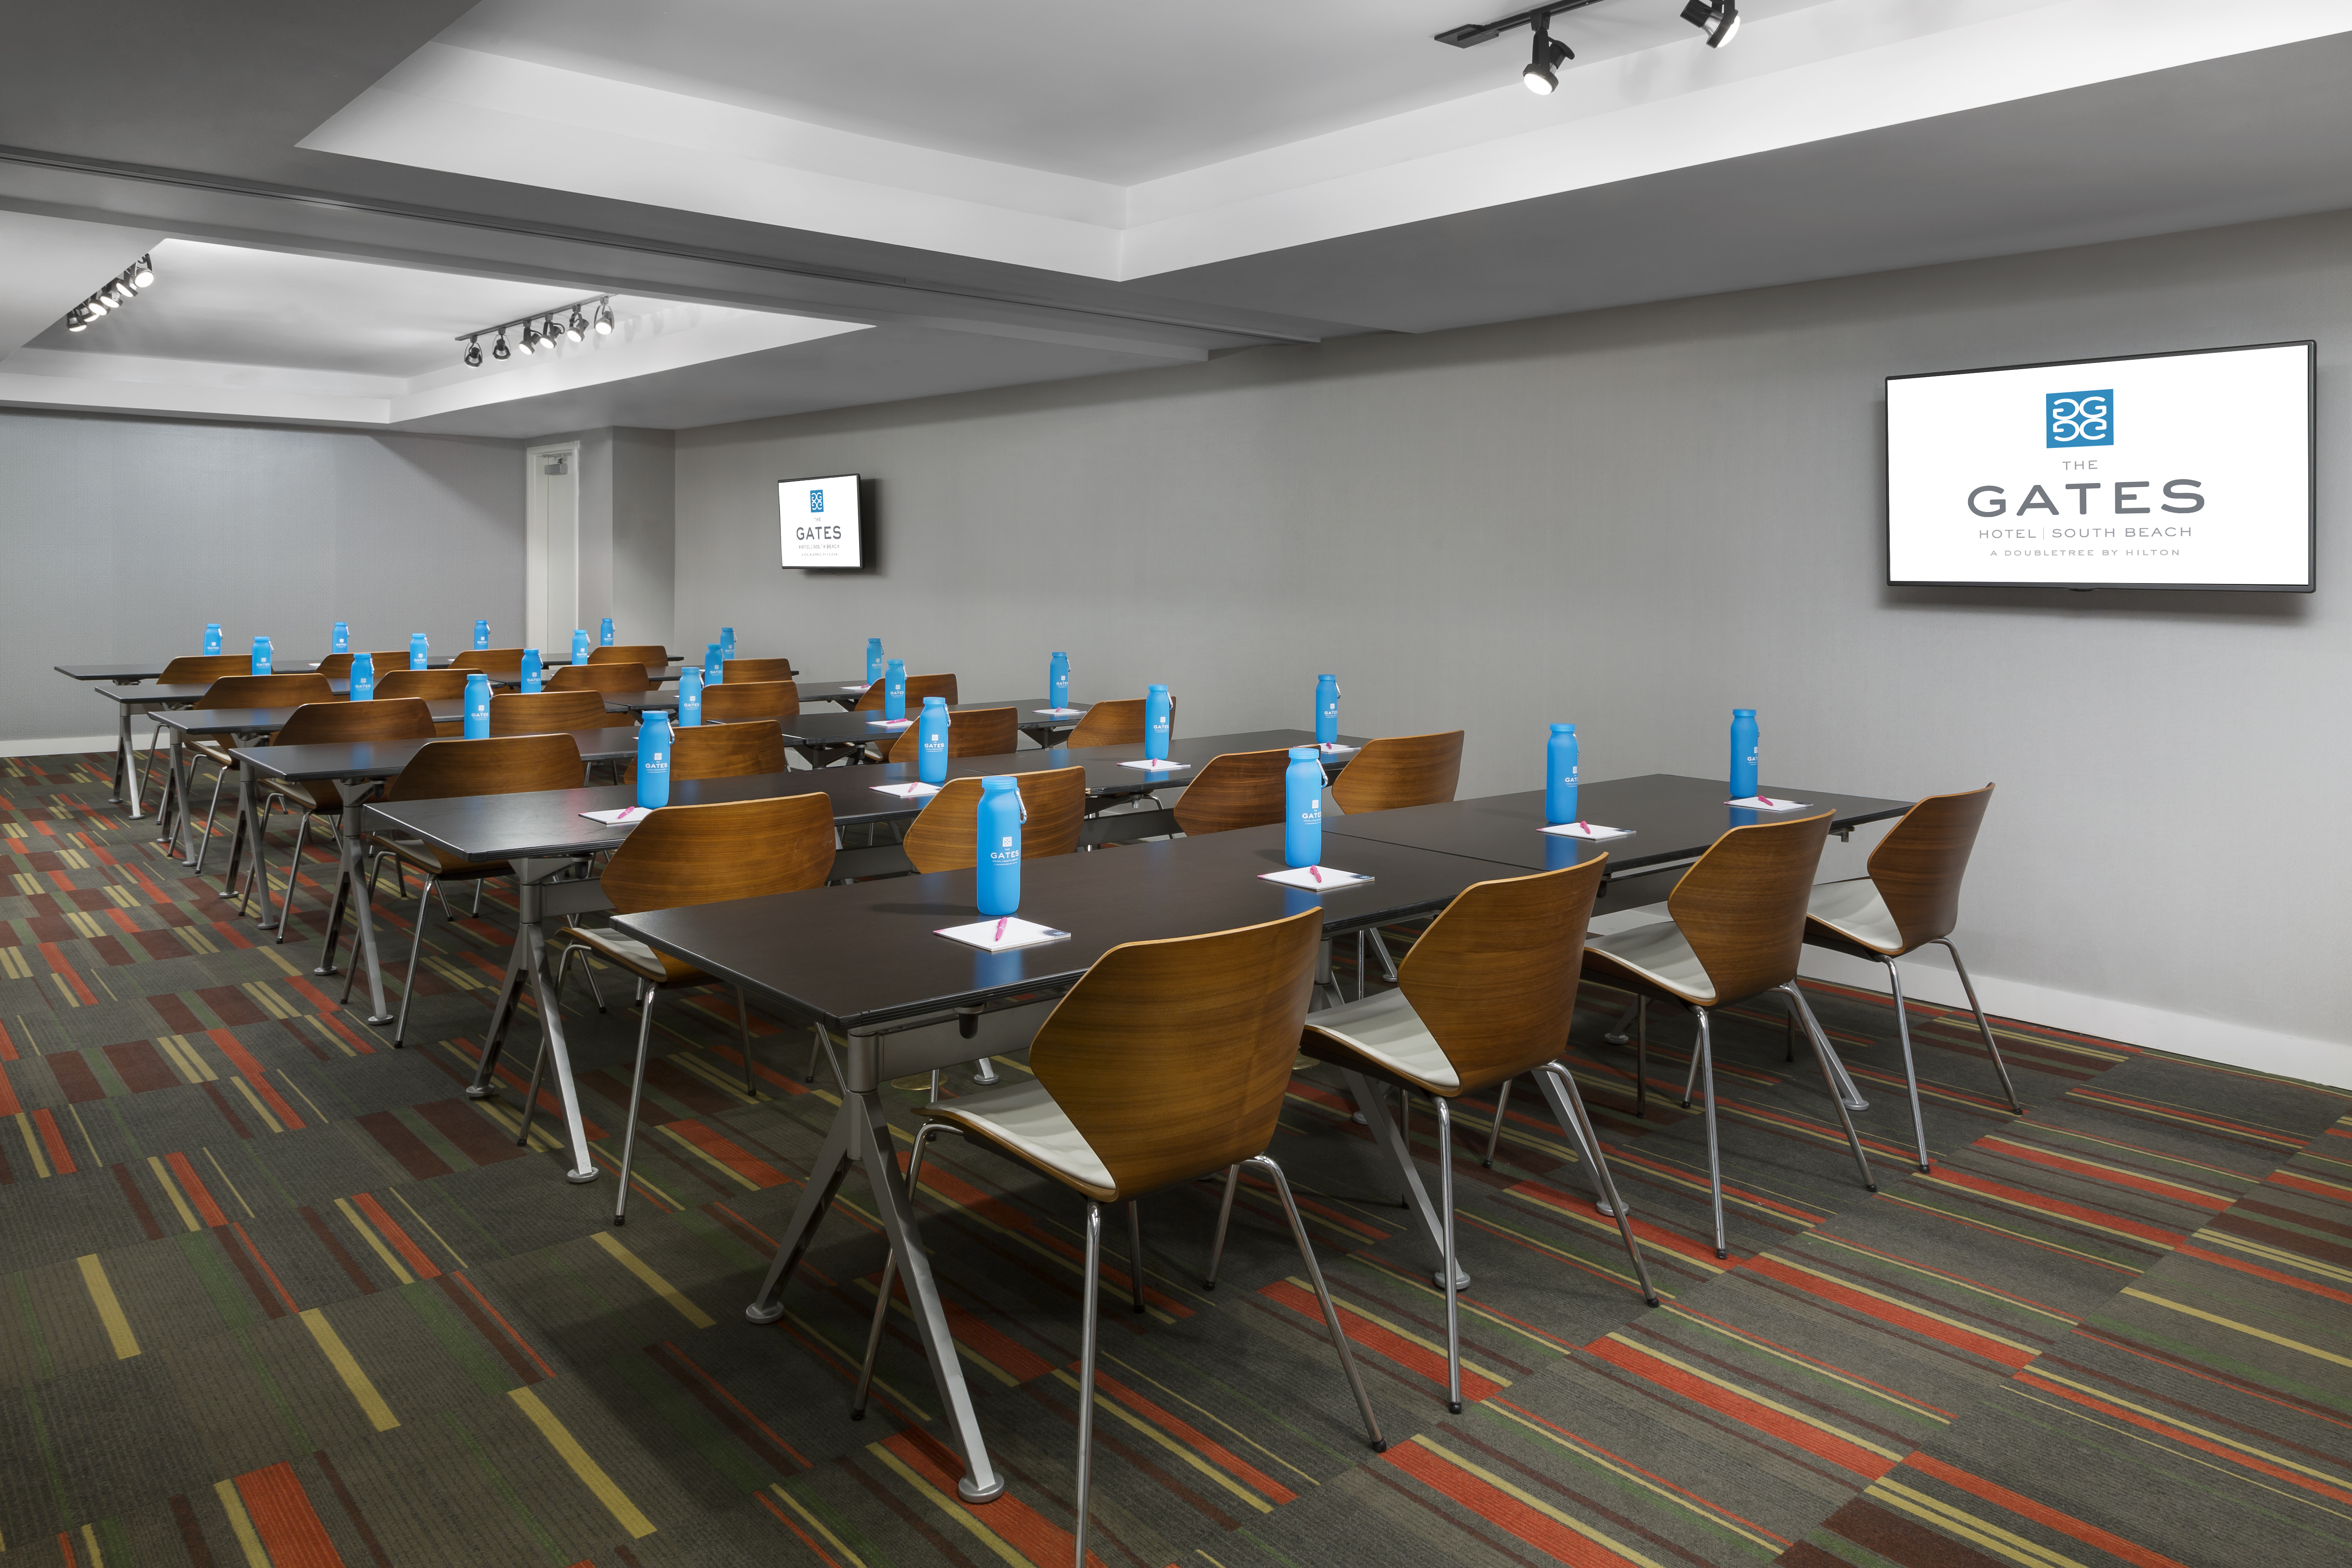 Meeting Room Classroom Setup with Wall Mounted HDTV